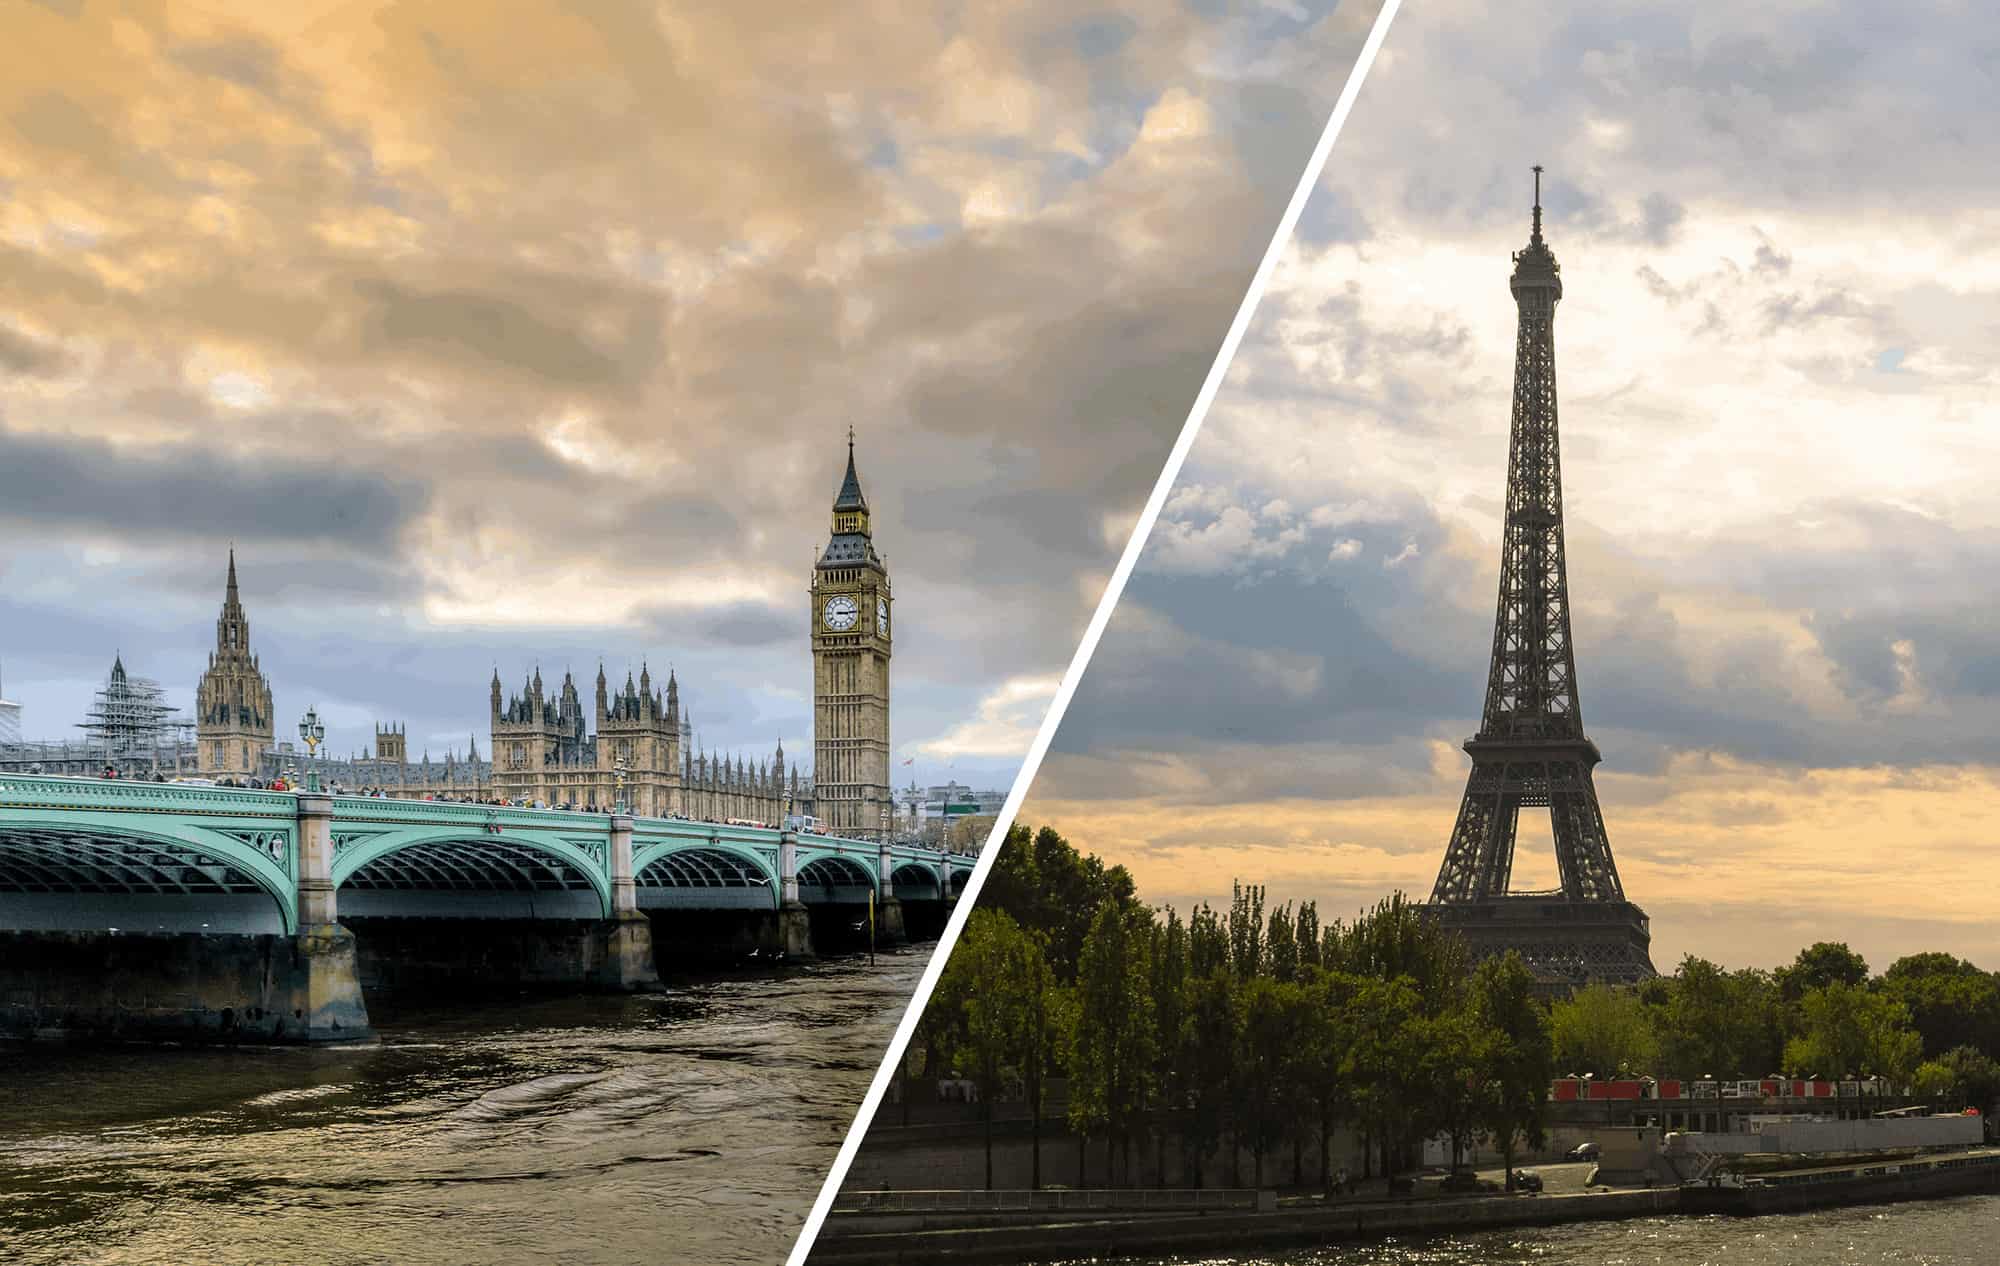 london or paris which is better to visit